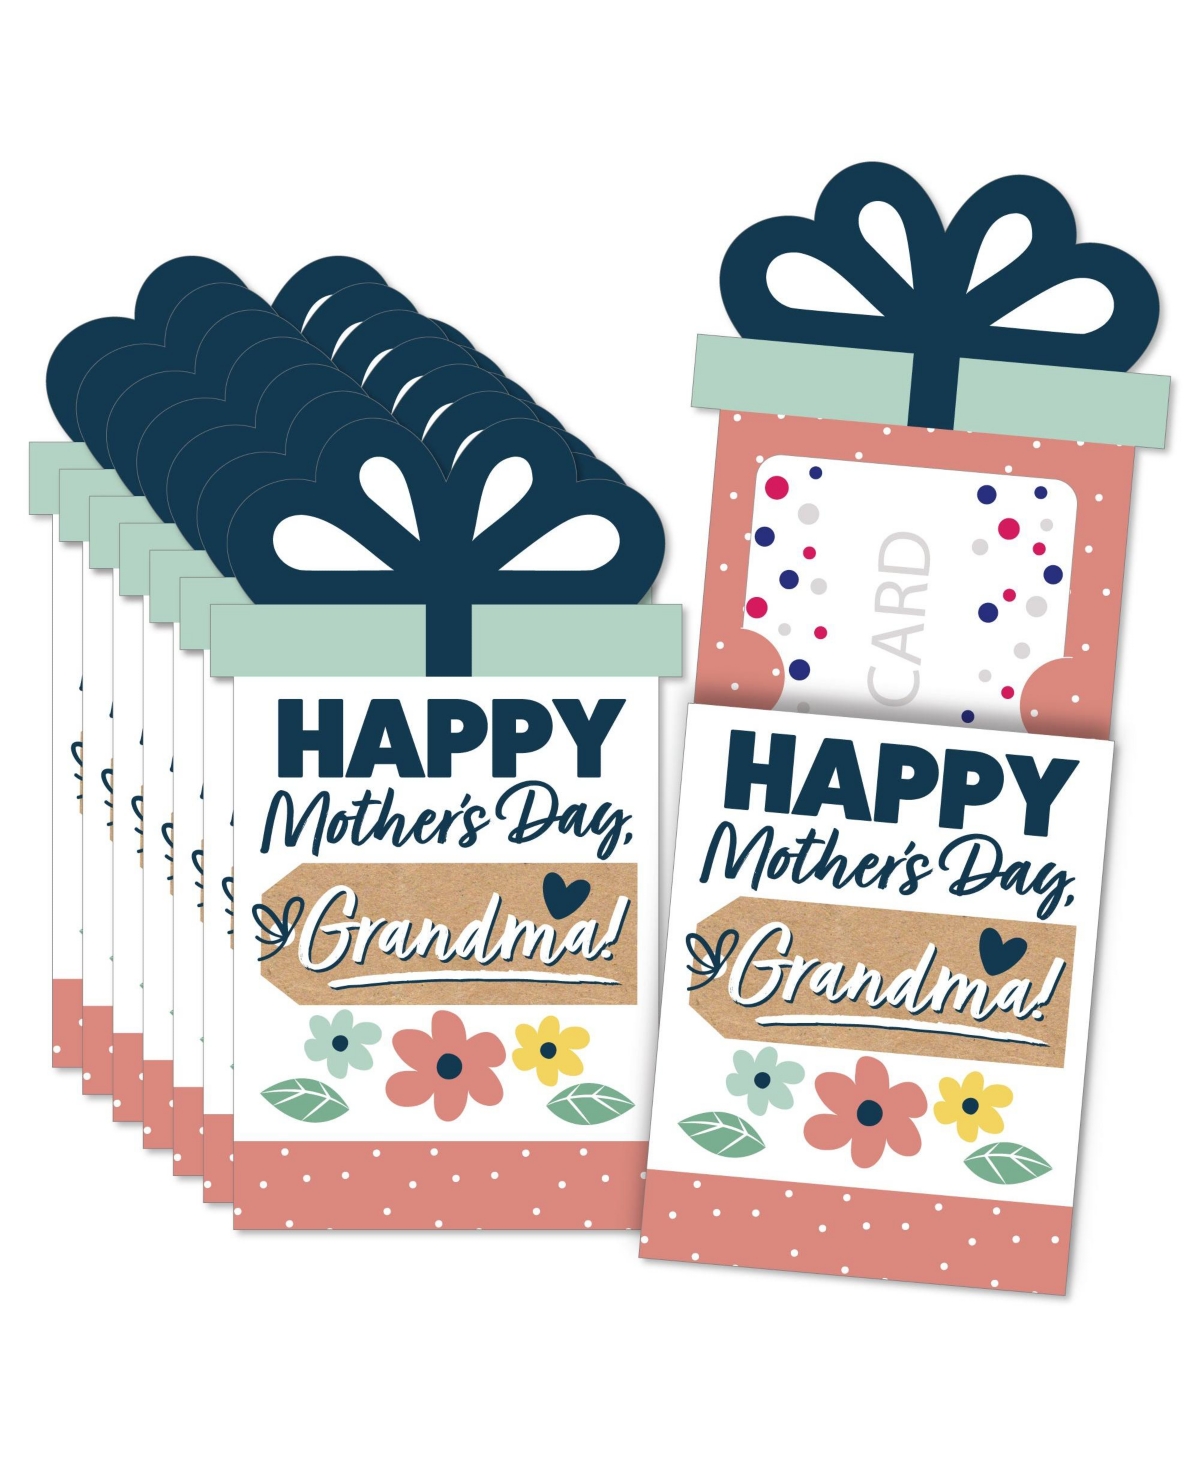 Grandma, Happy Mothers Day - Money & Gift Card Sleeves Nifty Gifty Holders 8 Ct